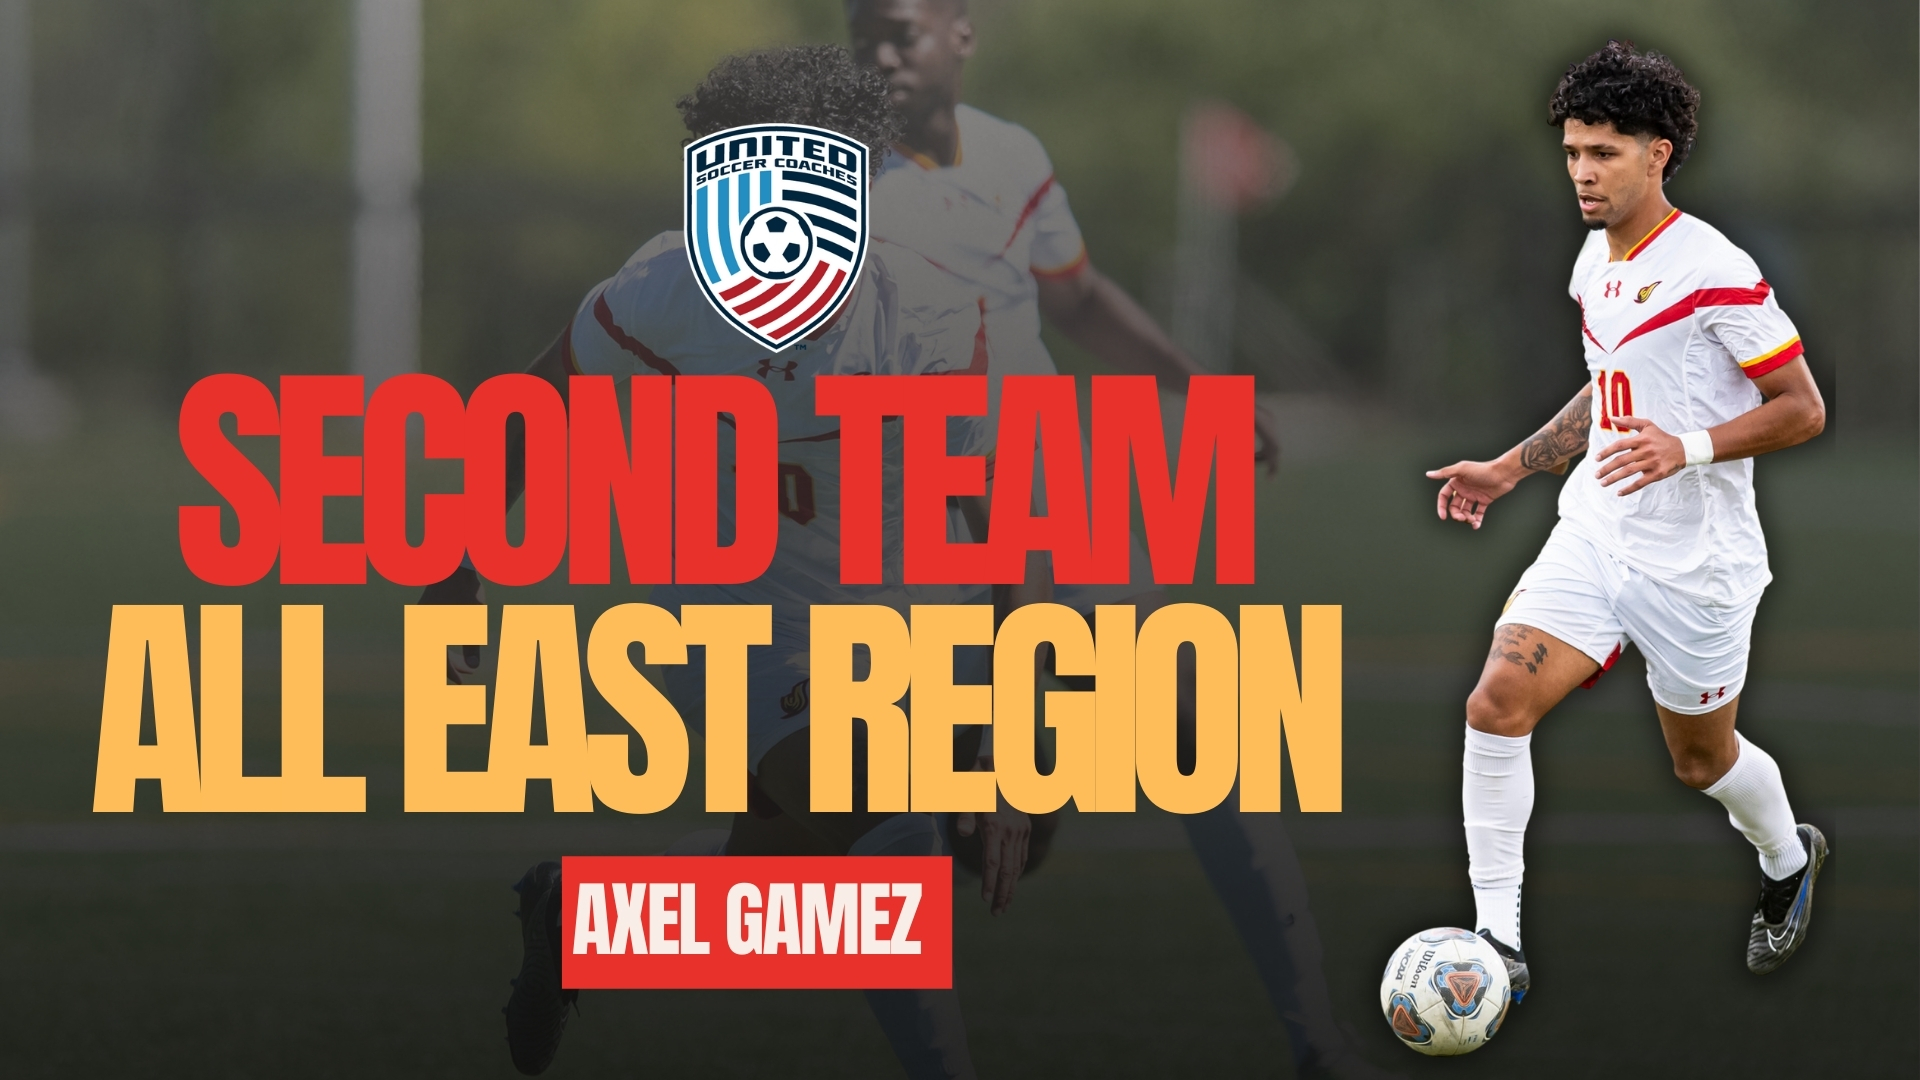 Axel Gamez Named to the Division II United Soccer Coaches East-Region Team